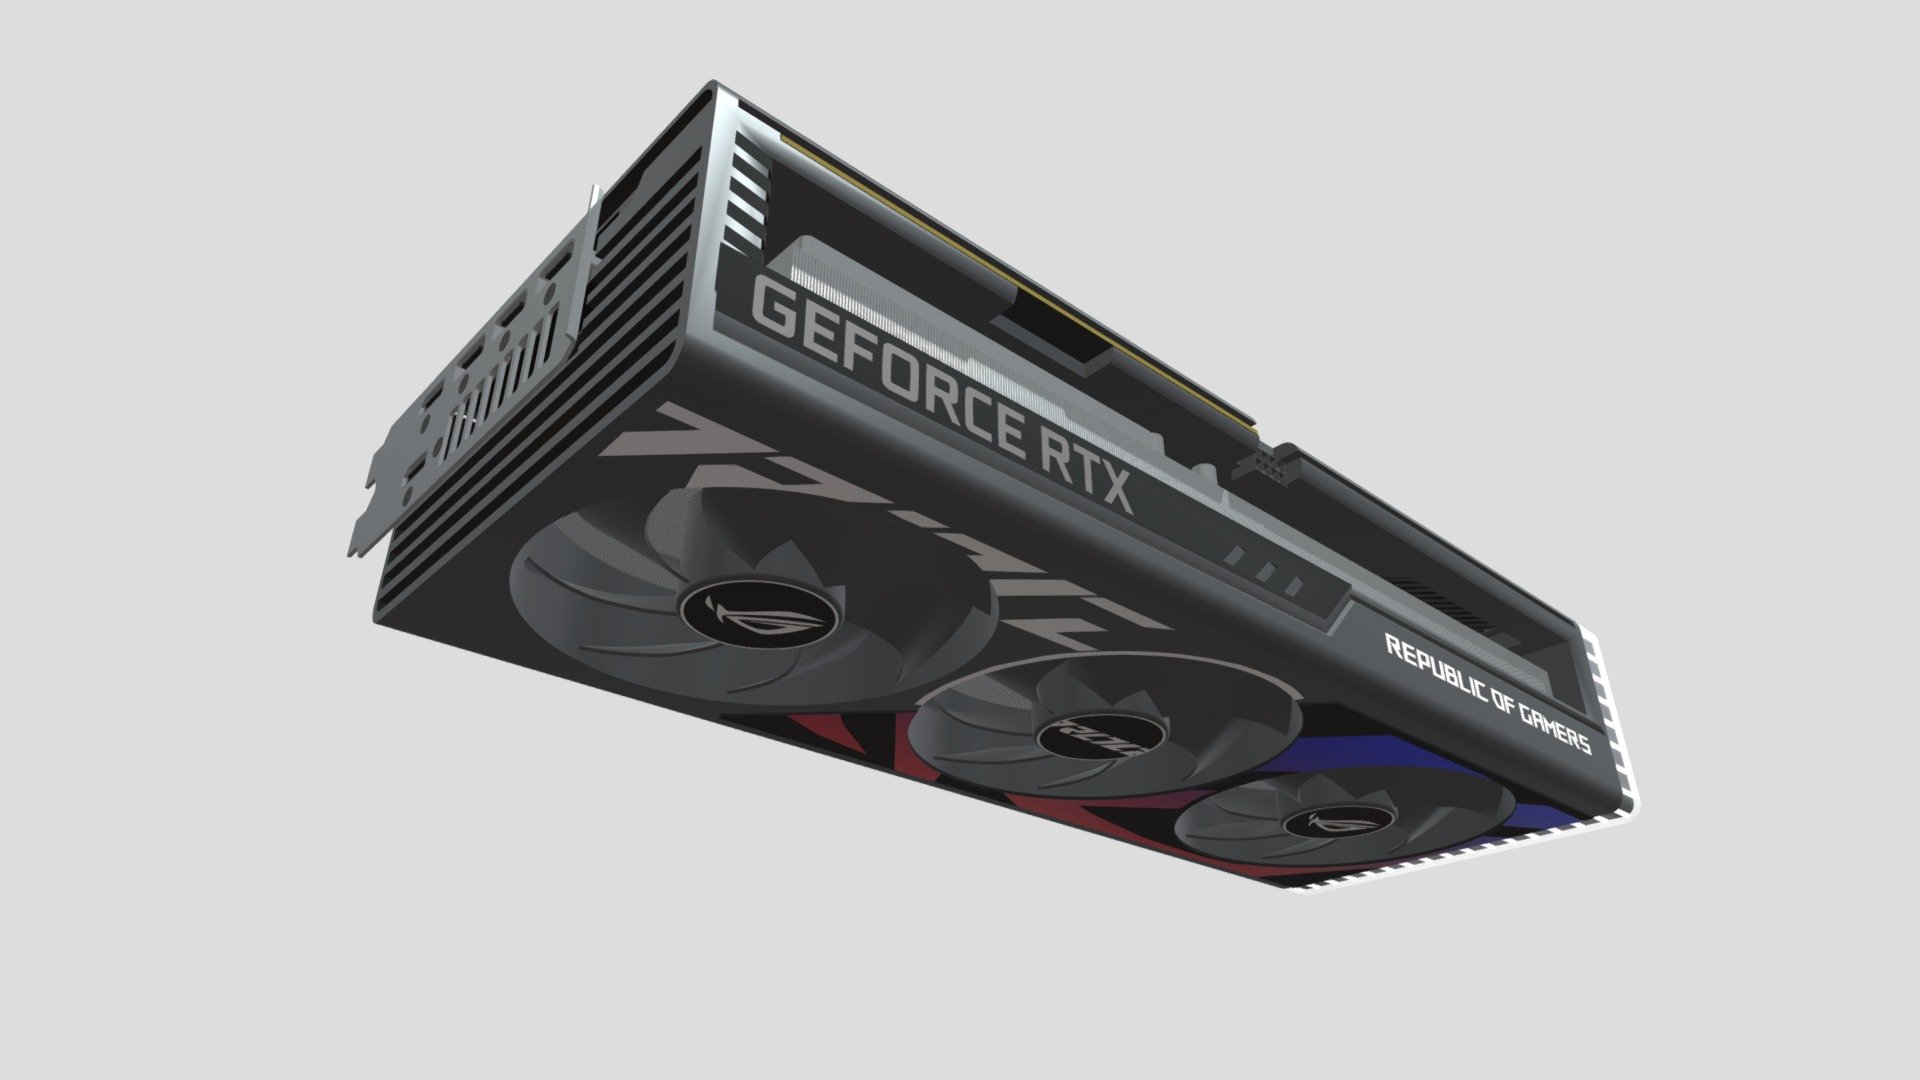 This is the newest graphics card from Nivida,(im still working on).
Made with Blender &lt;3 - Asus ROG Geforce RTX 4090 v2.0 - Download Free 3D model by MpPower™ (@MG990) 3d model